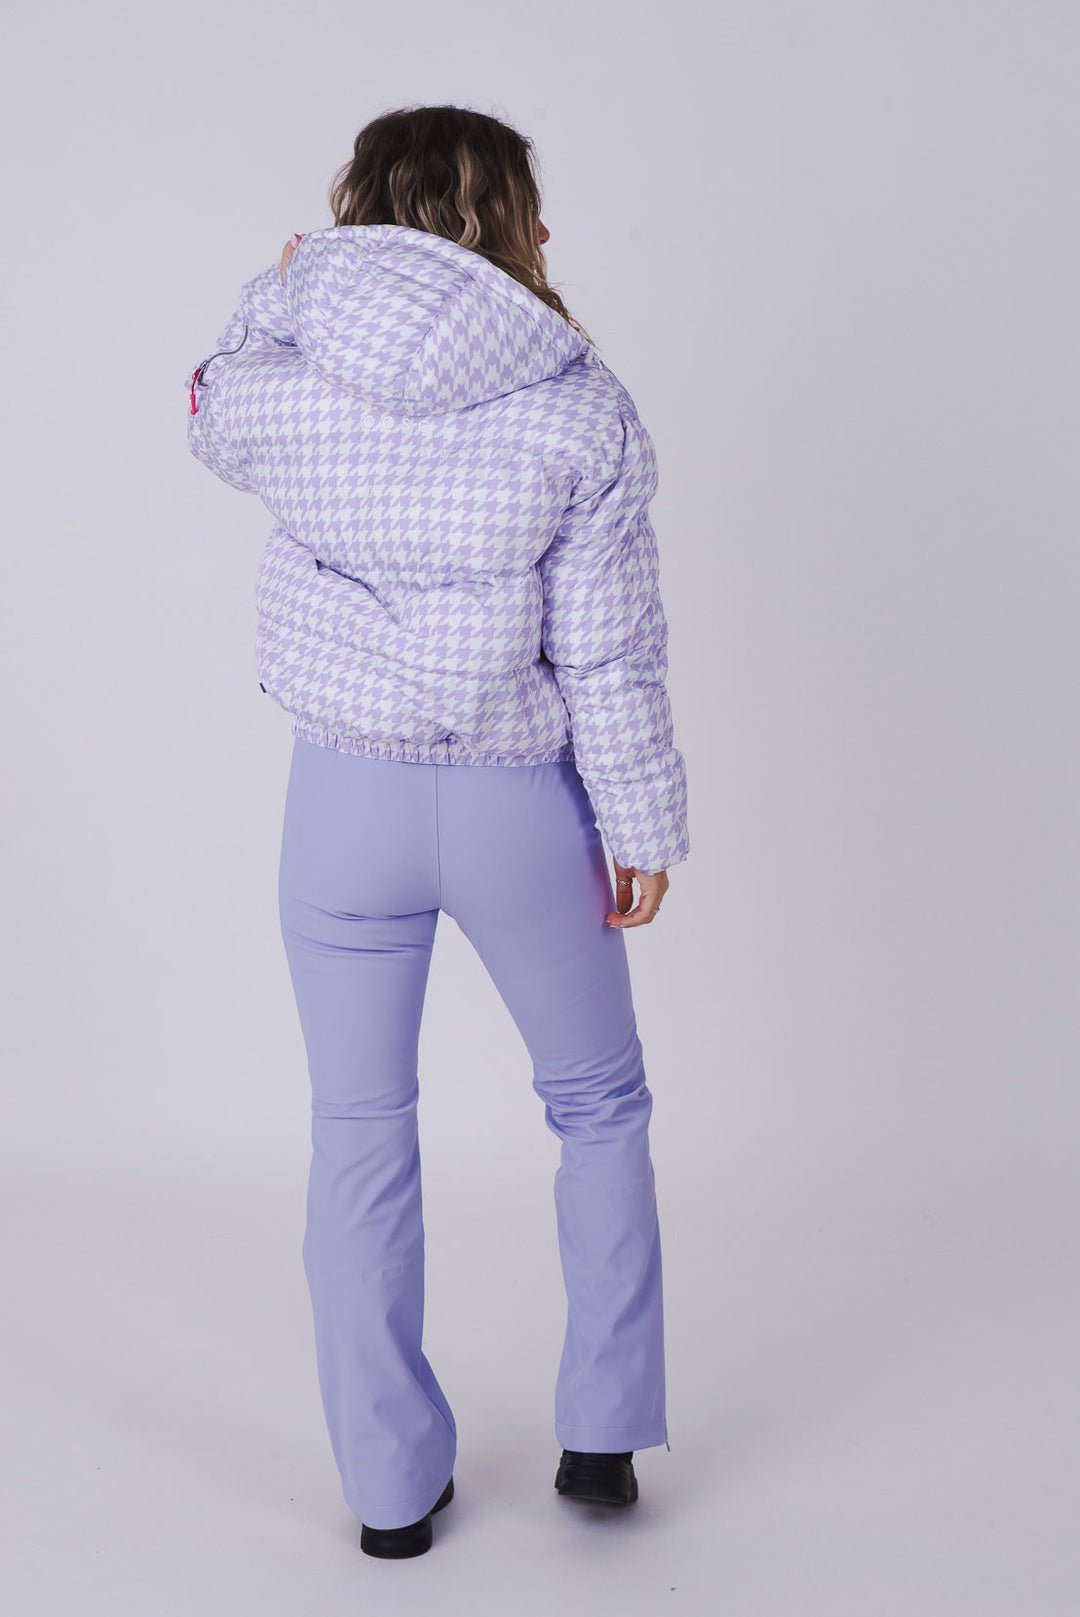 Purple Houndstooth Chic Puffer Jacket